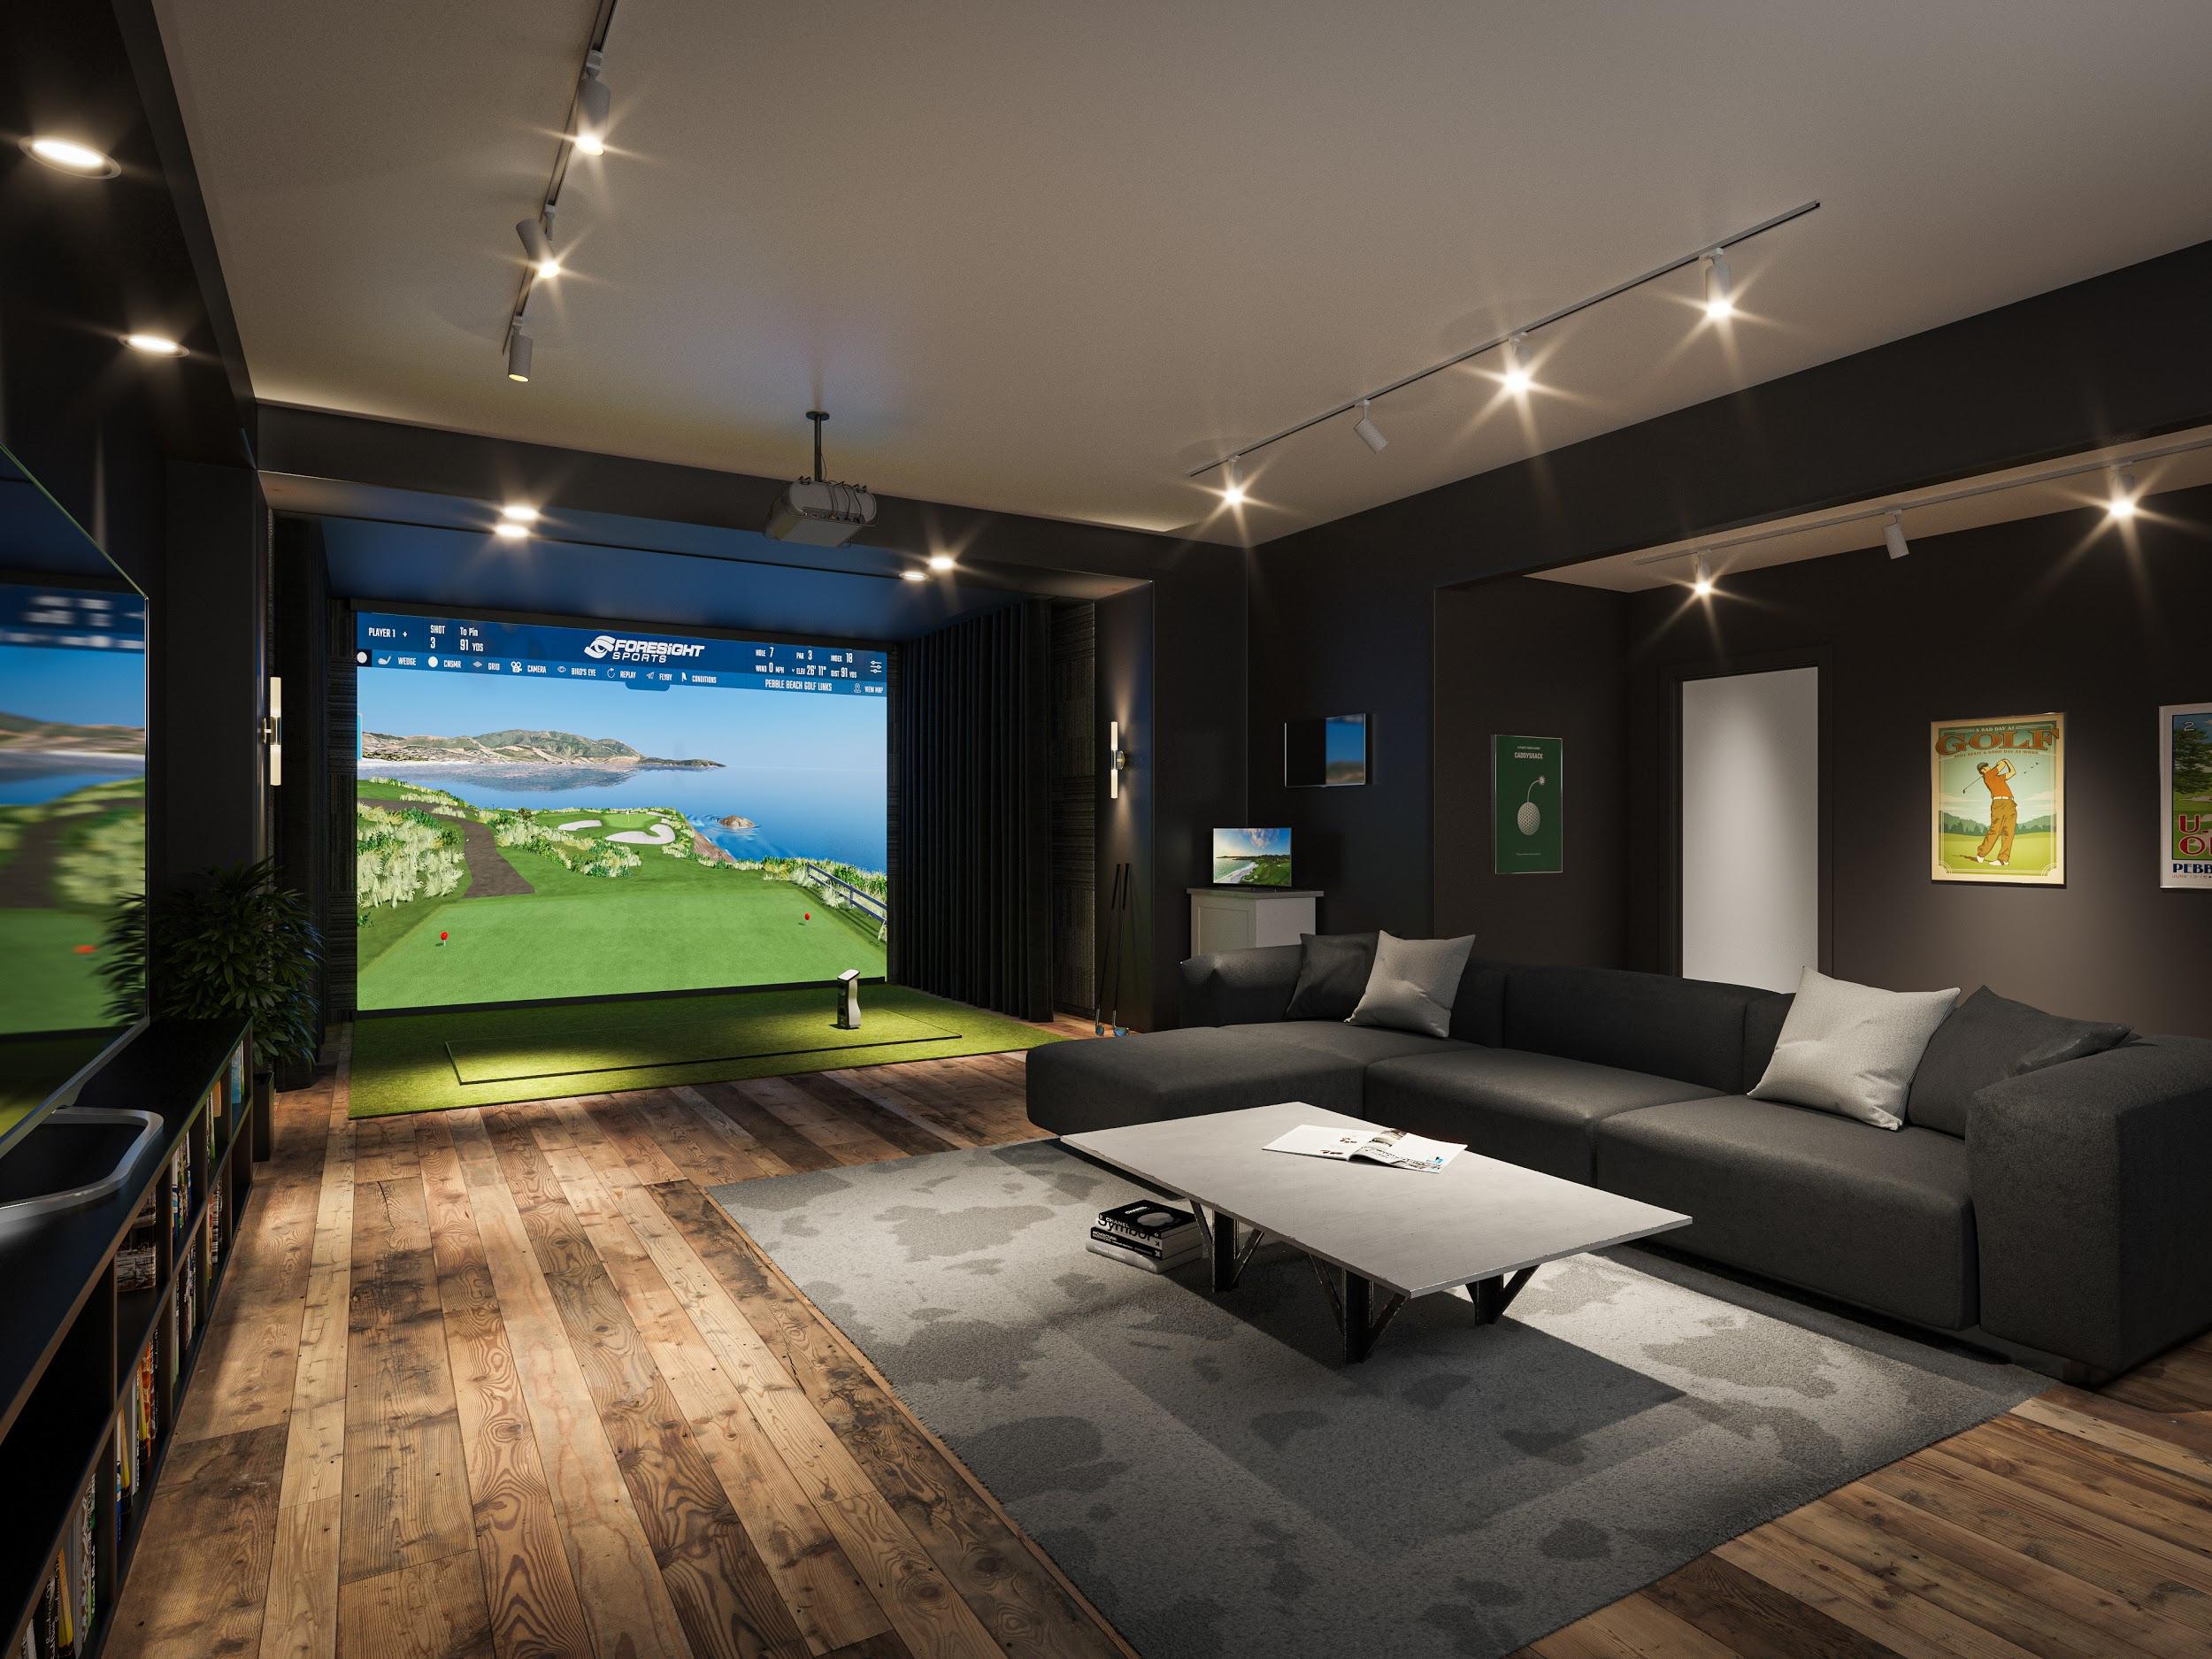 The Benefits of Practicing Golf on an Golf Simulator